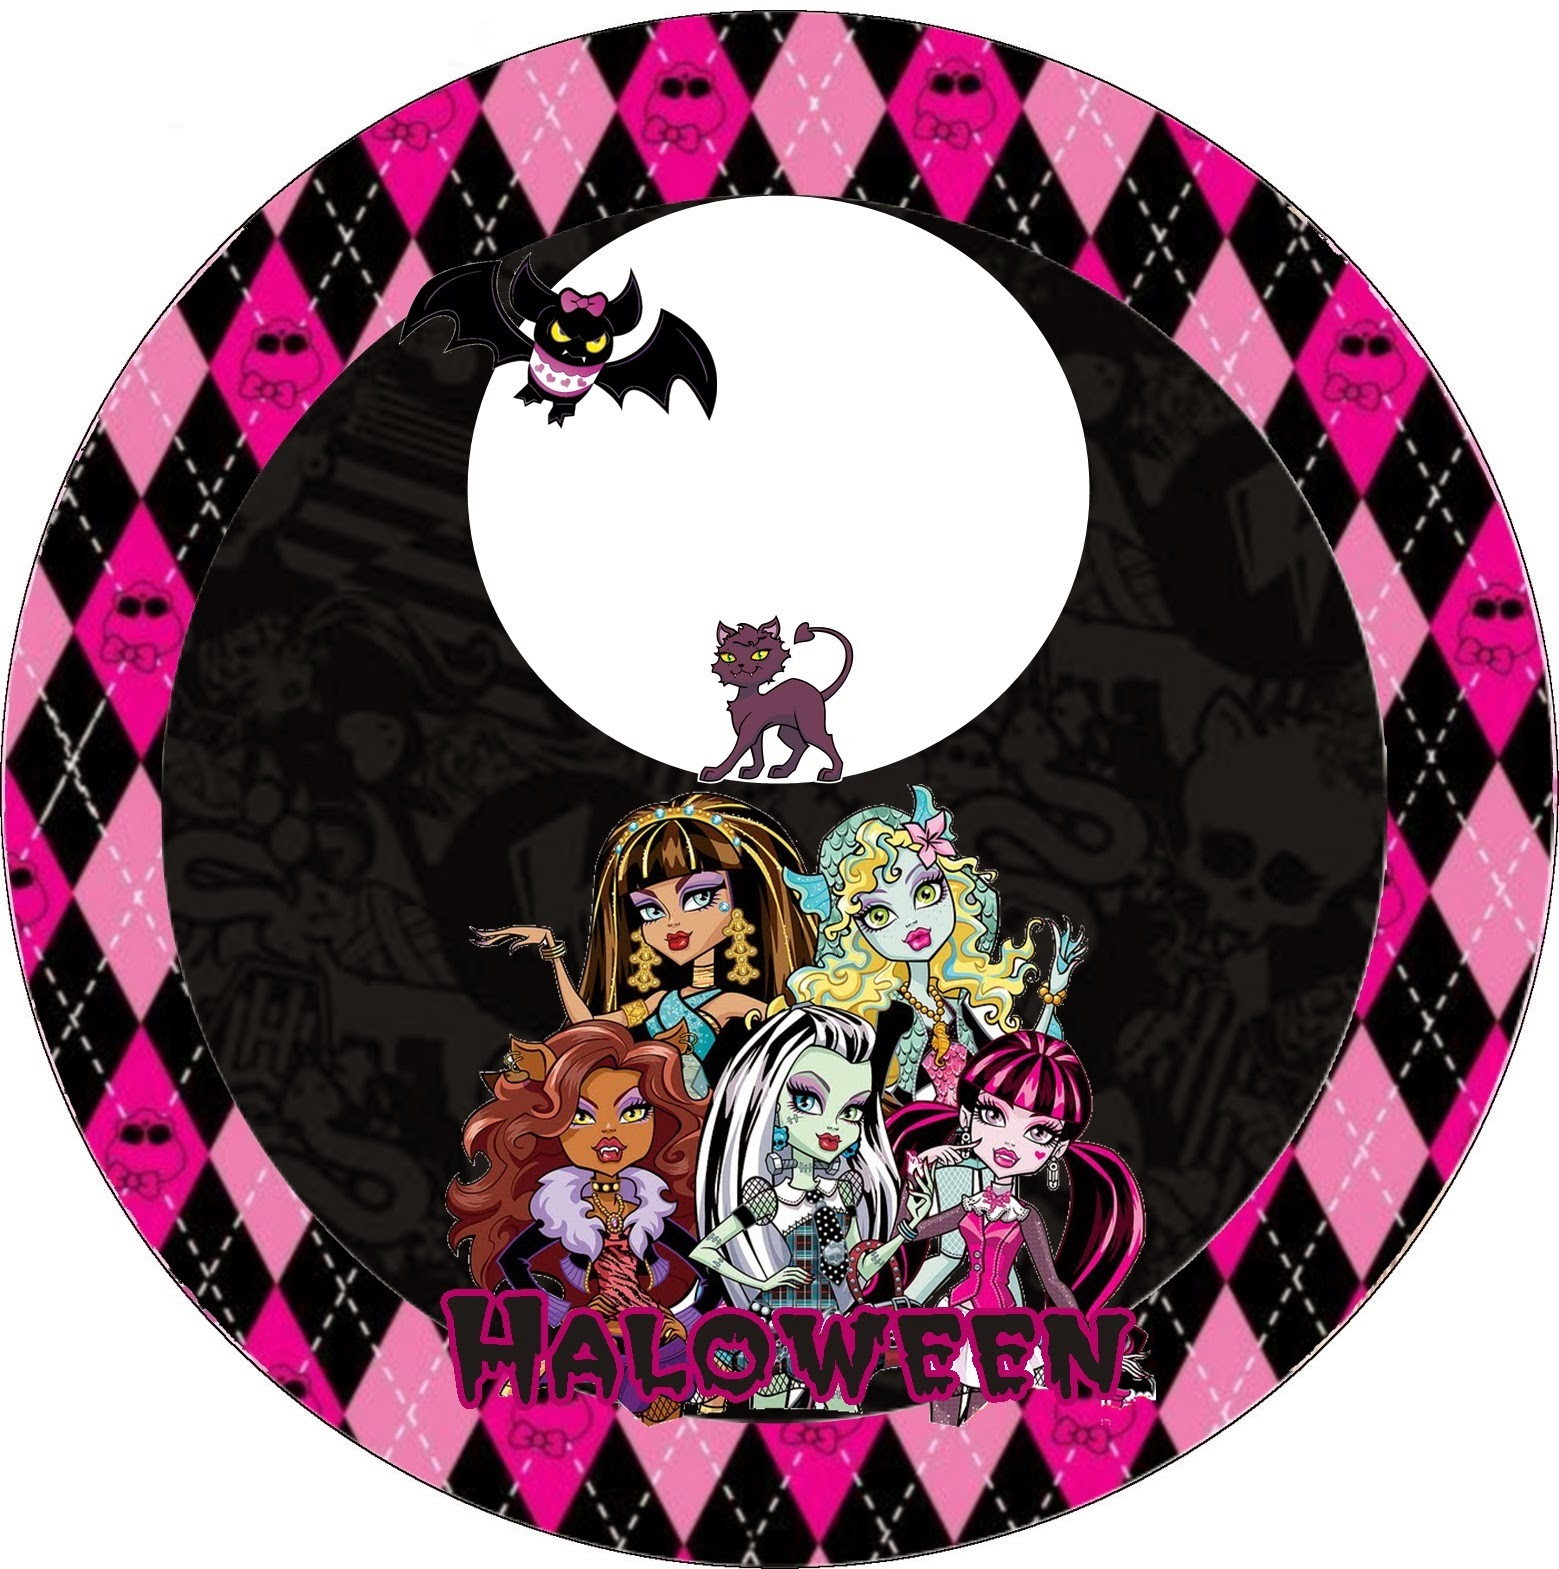 Monster High Halloween Special Free Printable Kit. | Oh My Fiesta - Free Printable Monster High Stickers